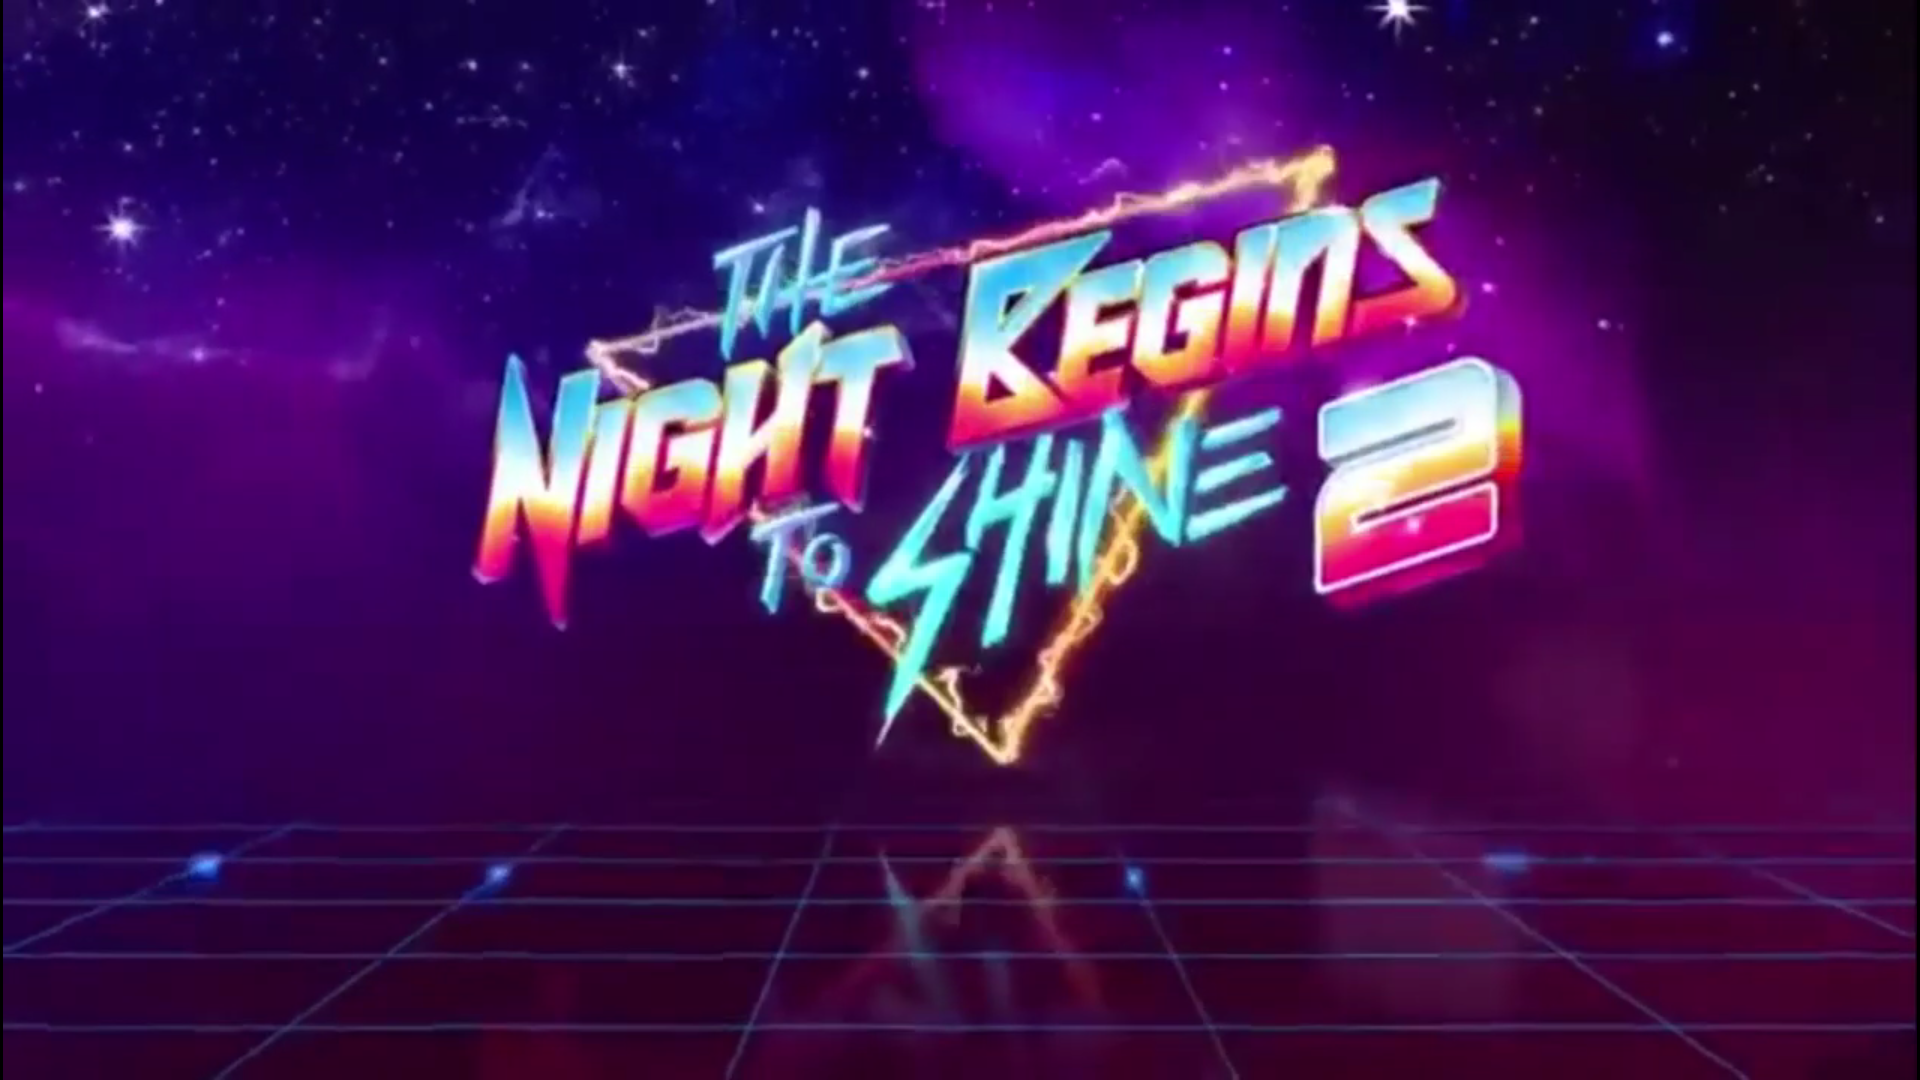 night begins to shine song download